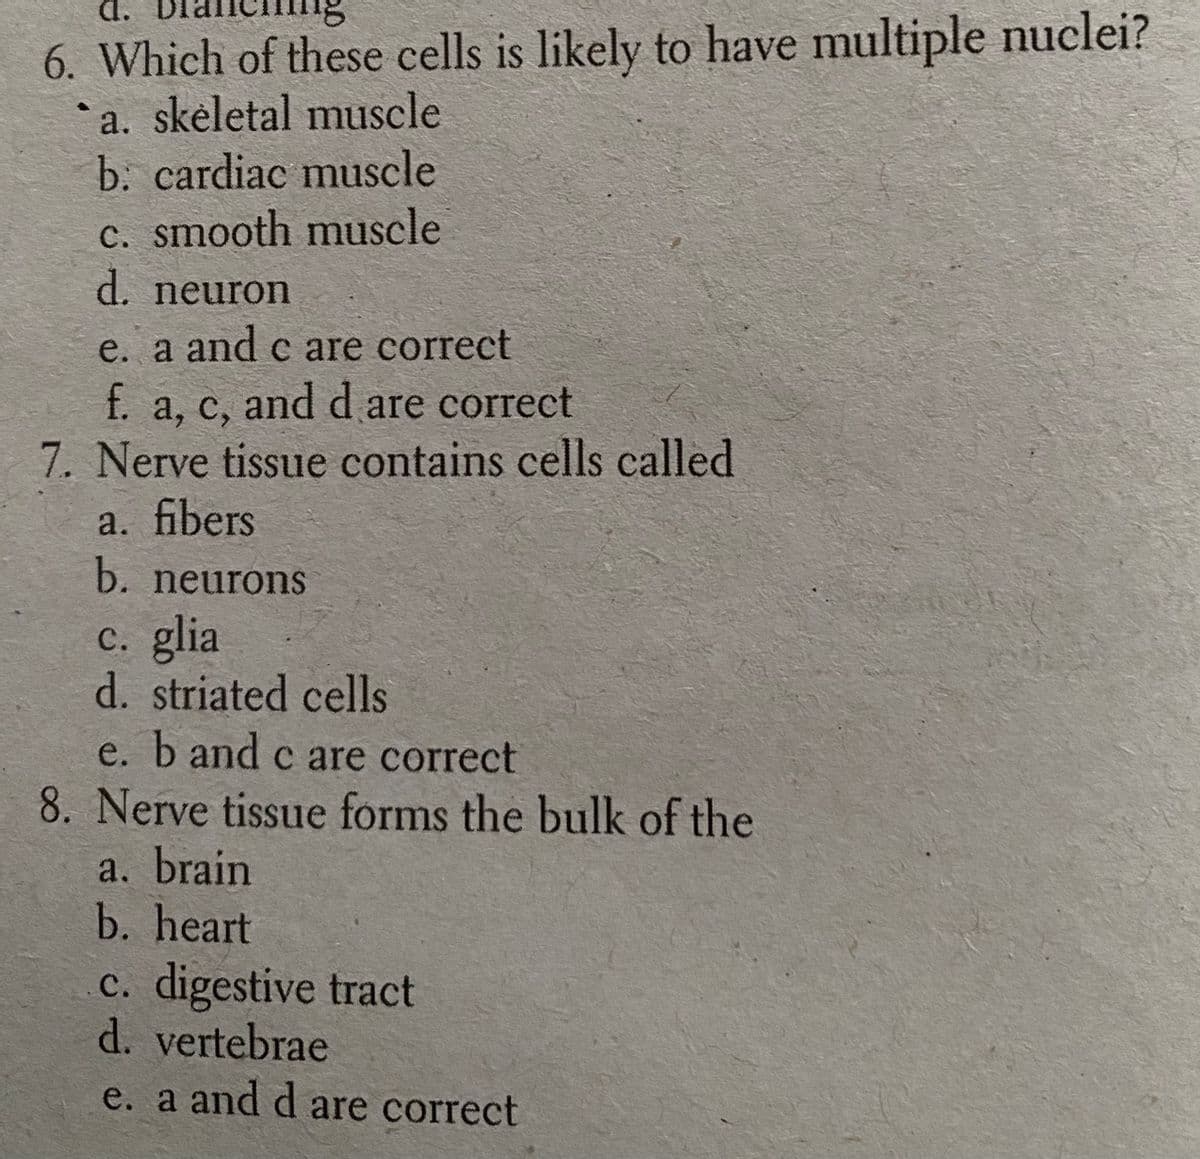 d.
6. Which of these cells is likely to have multiple nuclei?
*a. skėletal muscle
b. cardiac muscle
c. smooth muscle
d. neuron
e. a and c are correct
f. a, c, and d are correct
7. Nerve tissue contains cells called
a. fibers
b. neurons
C. glia
d. striated cells
e. b and c are correct
8. Nerve tissue forms the bulk of the
a. brain
b. heart
c. digestive tract
d. vertebrae
e. a and d are correct
